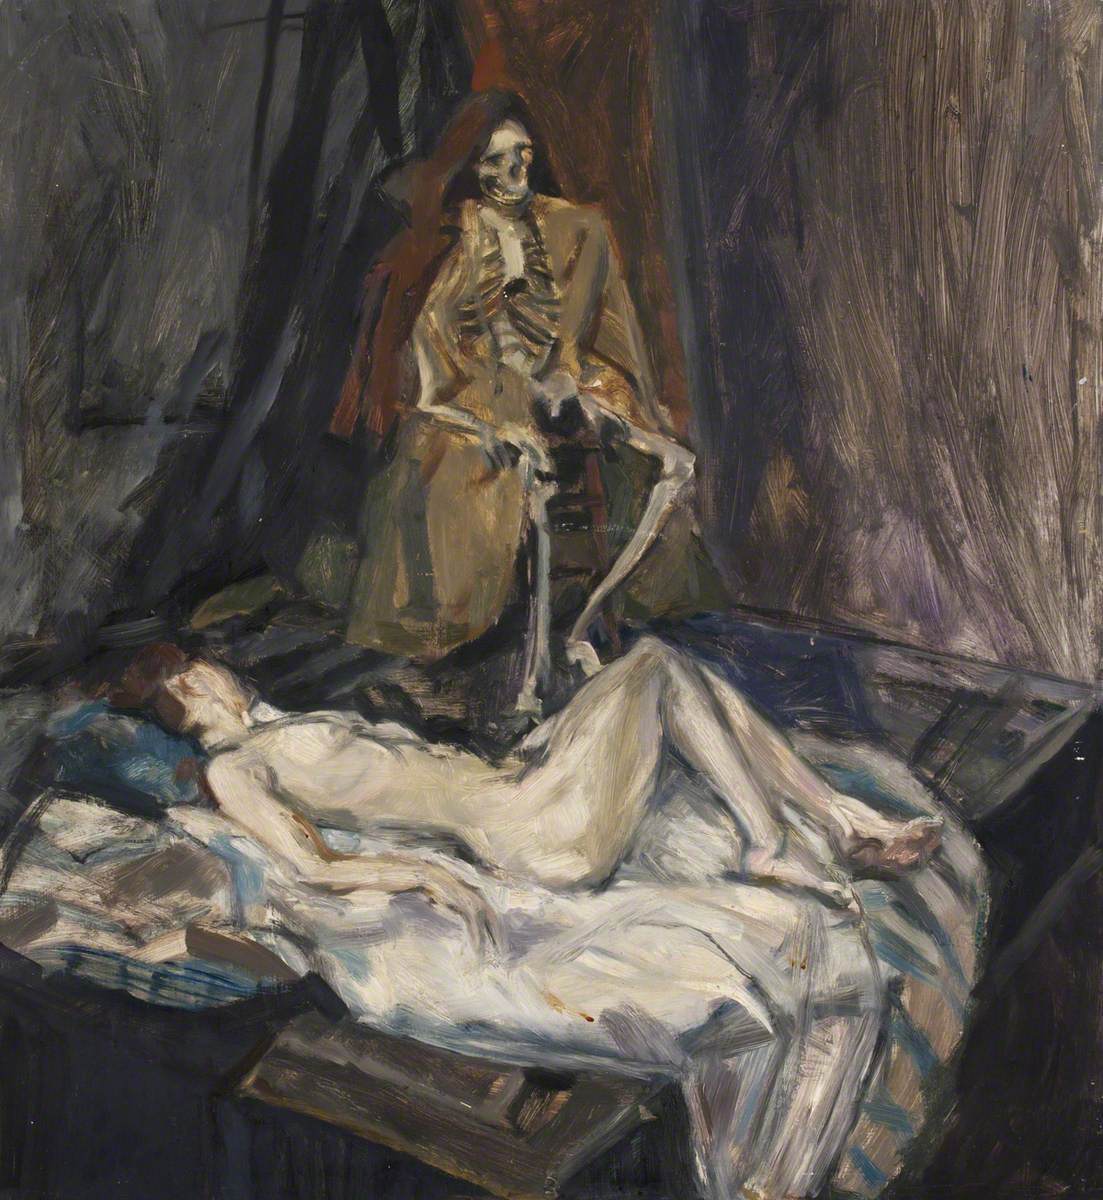 Reclining Female Nude with Skeleton